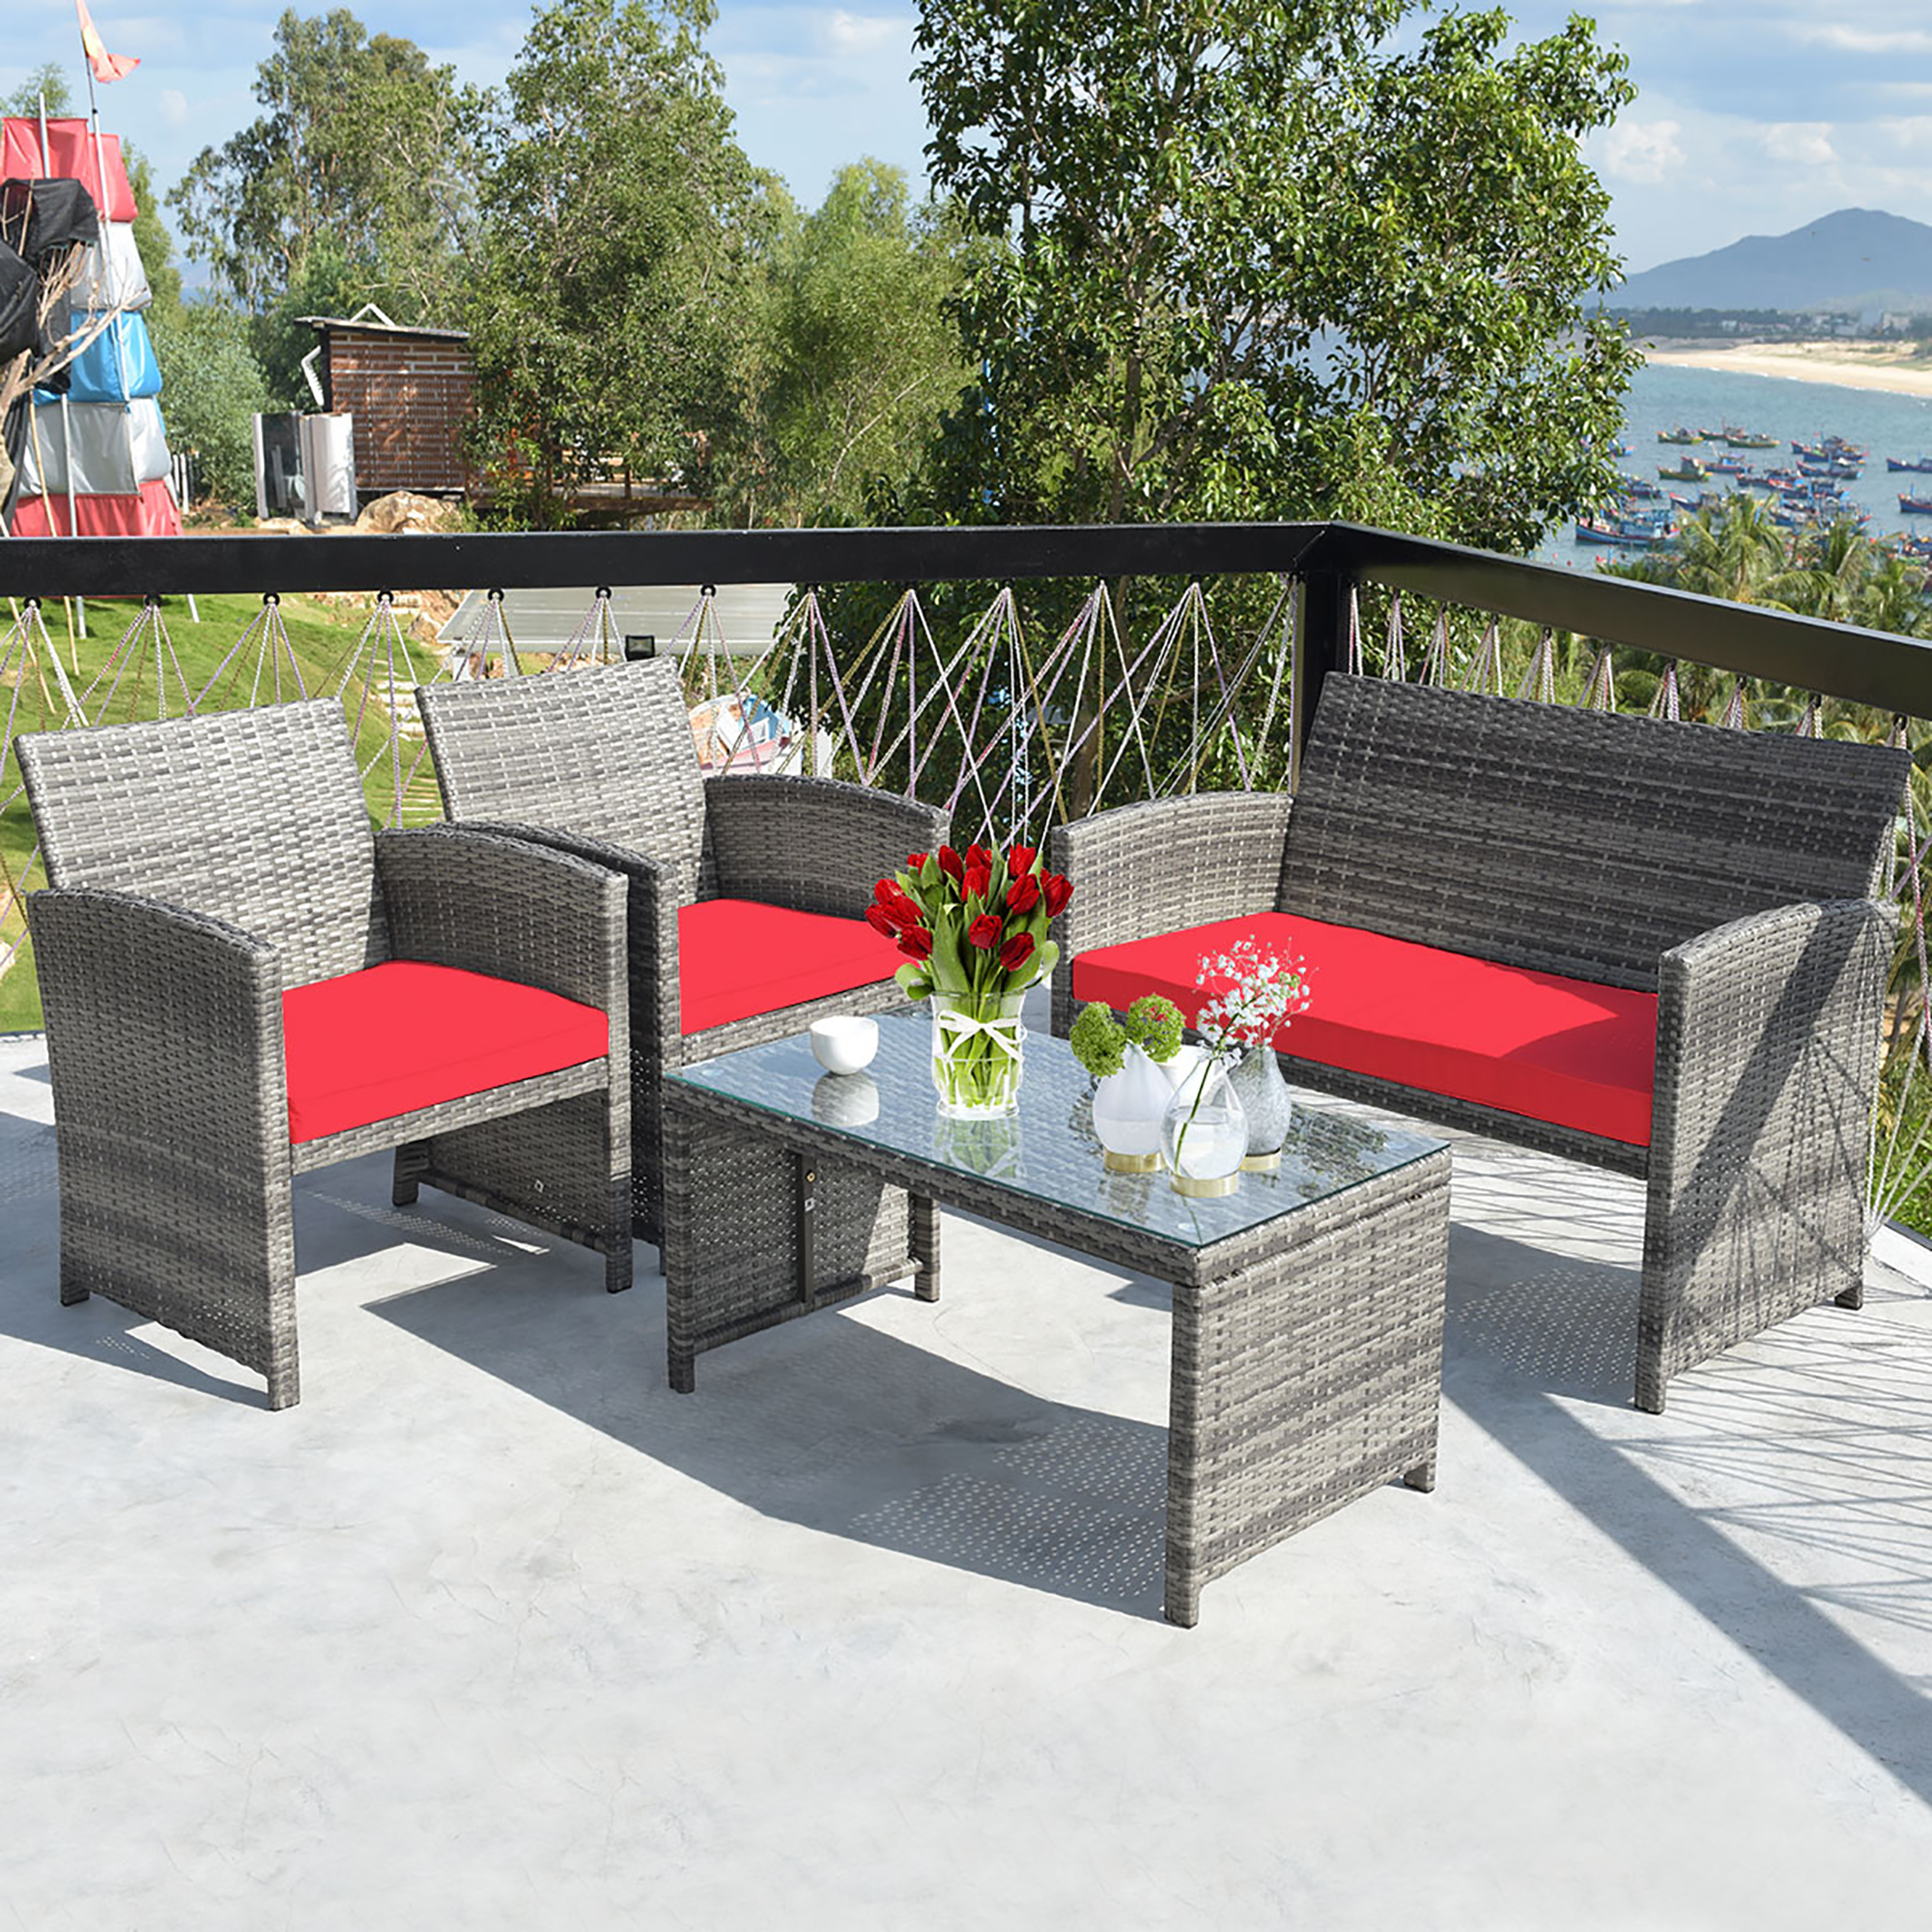 Costway 4PCS Patio Rattan Conversation Glass Table Top Cushioned Sofa Red - image 1 of 10